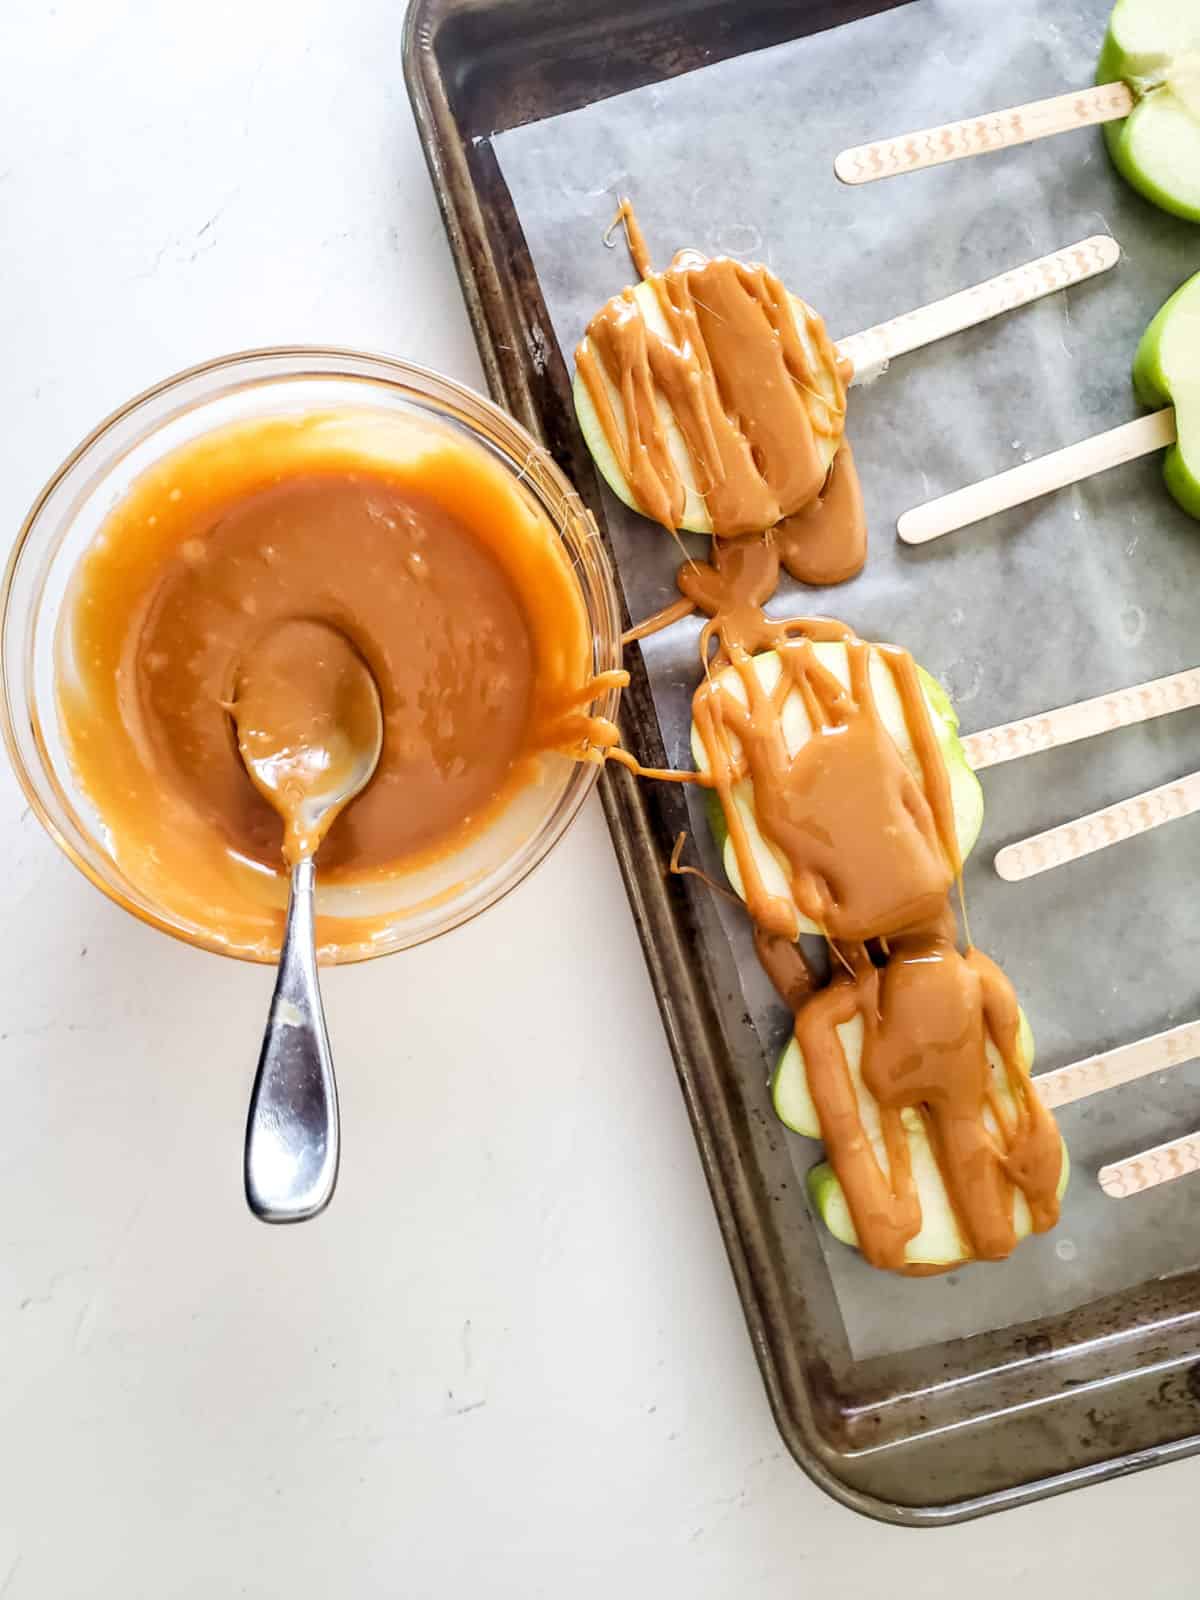 Caramel drizzled apple slices on a baking tray, bowl with melted caramel, white surface.